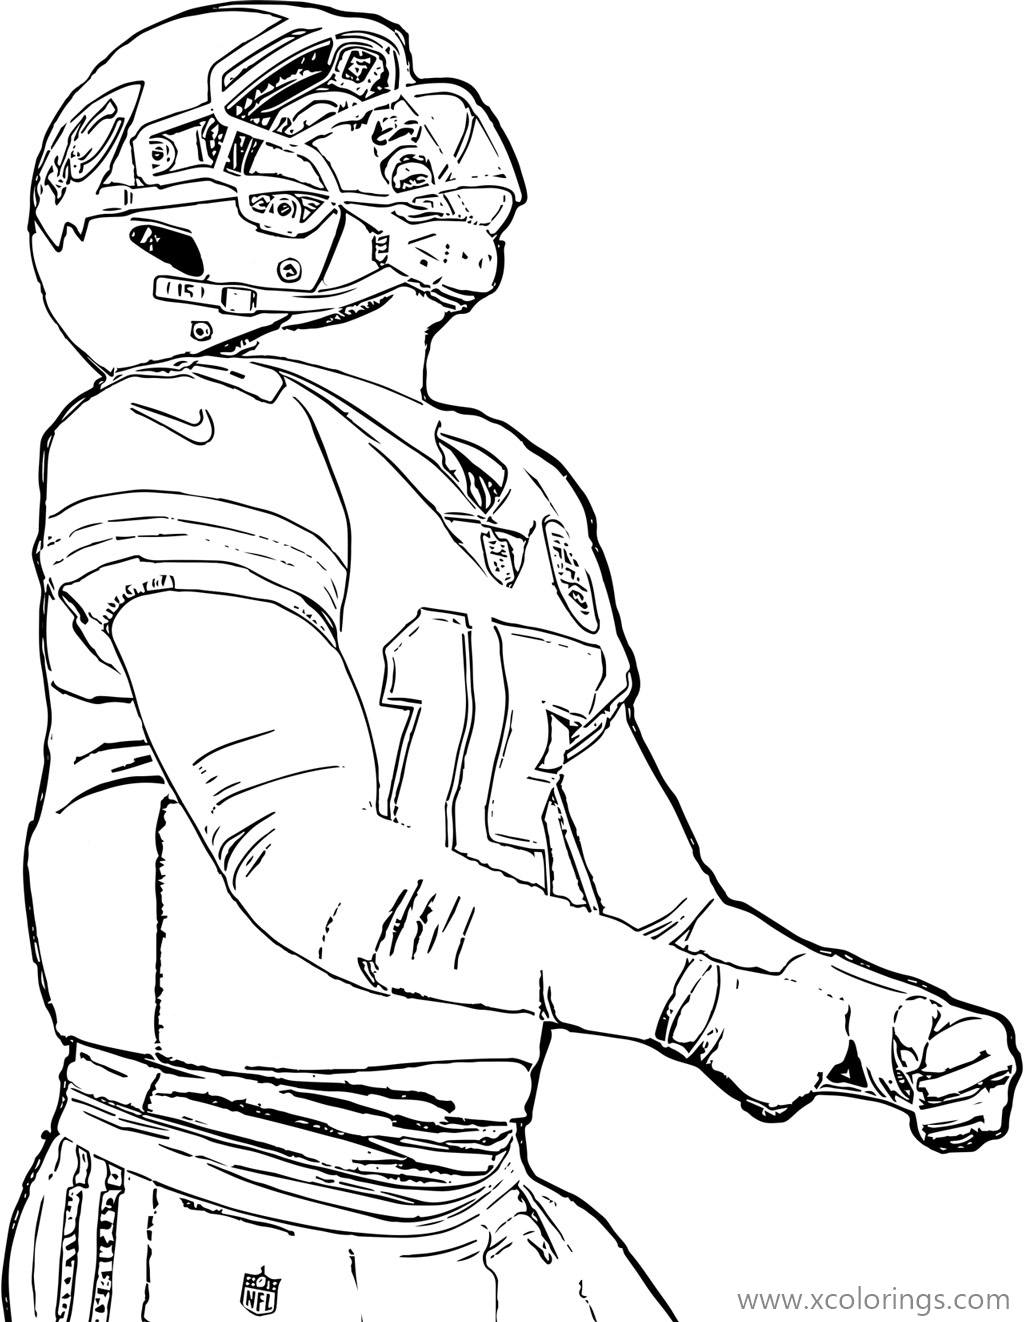 Patrick Mahomes Coloring Pages from Kansas Chiefs - XColorings.com